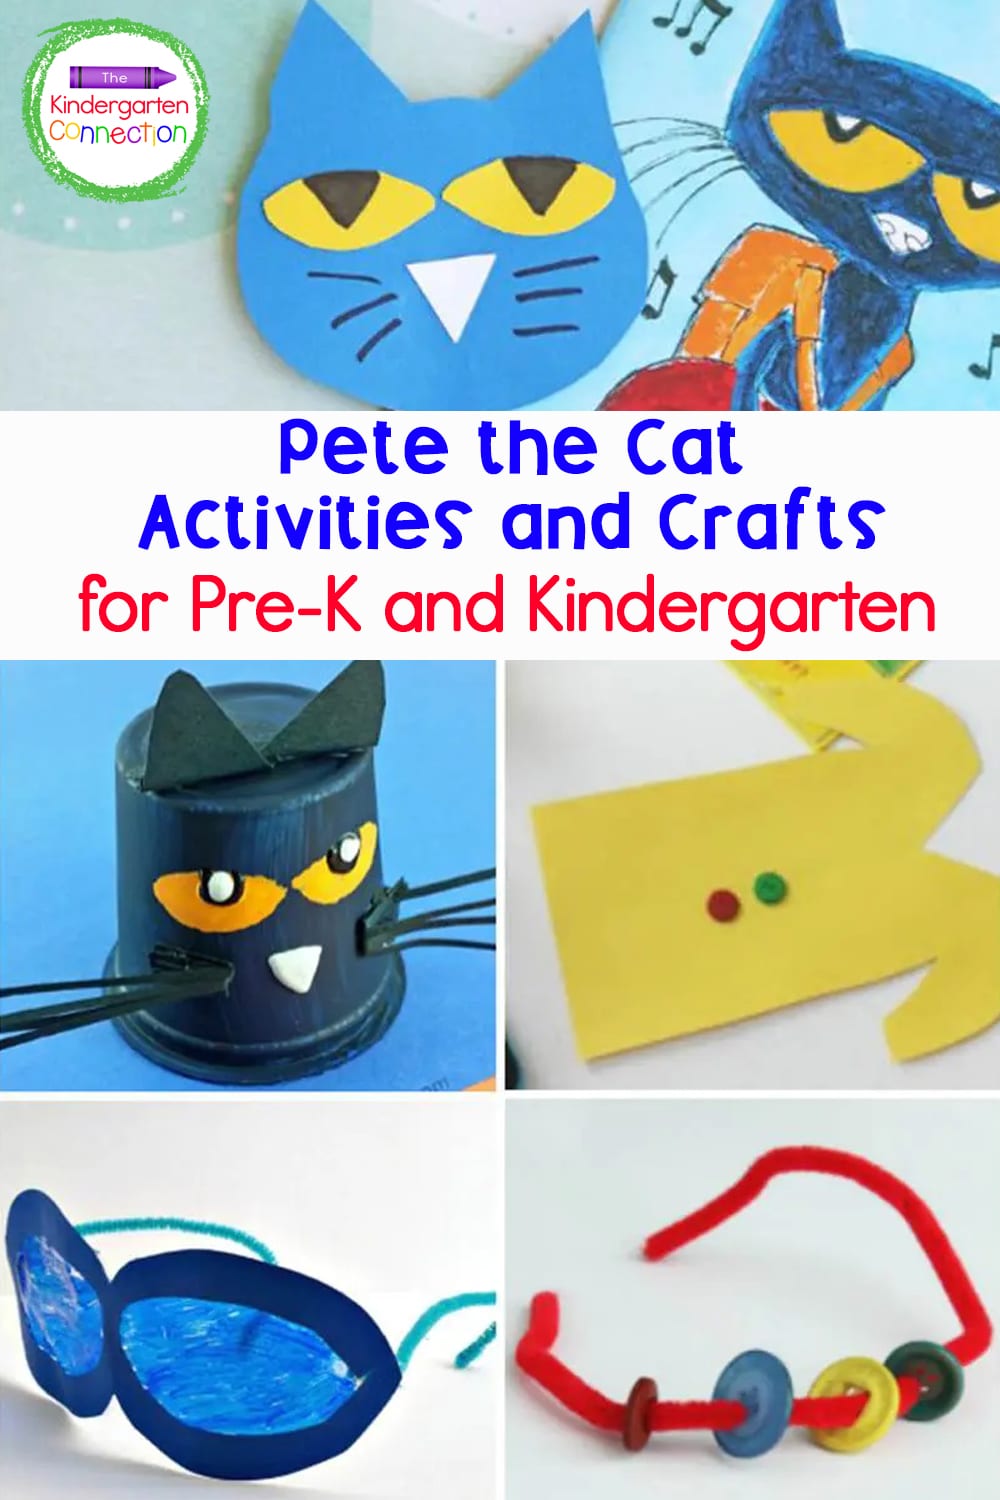 These Pete the Cat activities and crafts are great to pair with some of your favorite Pete books for some hands-on learning fun!